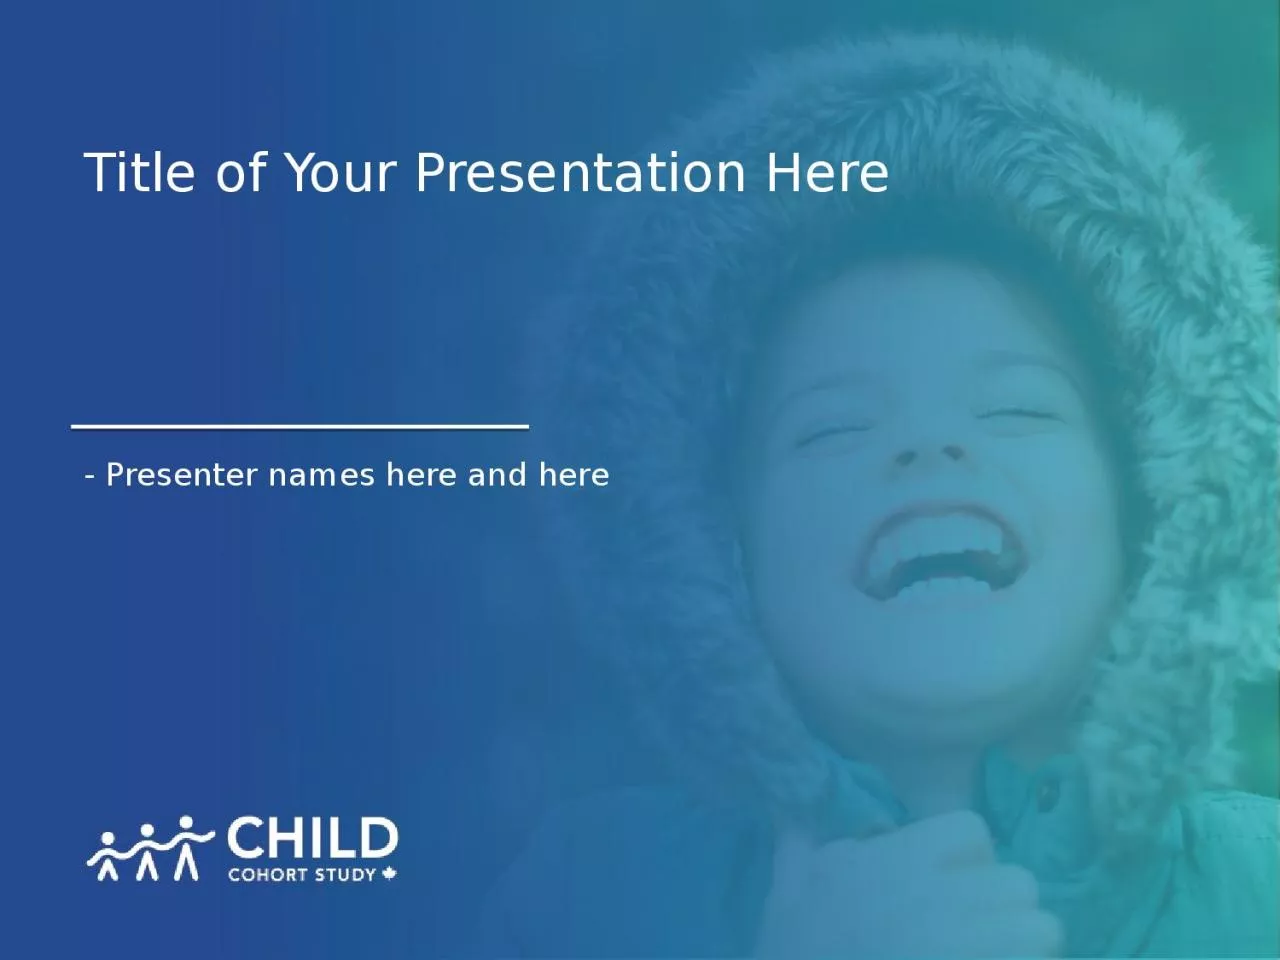 Title of Your Presentation Here